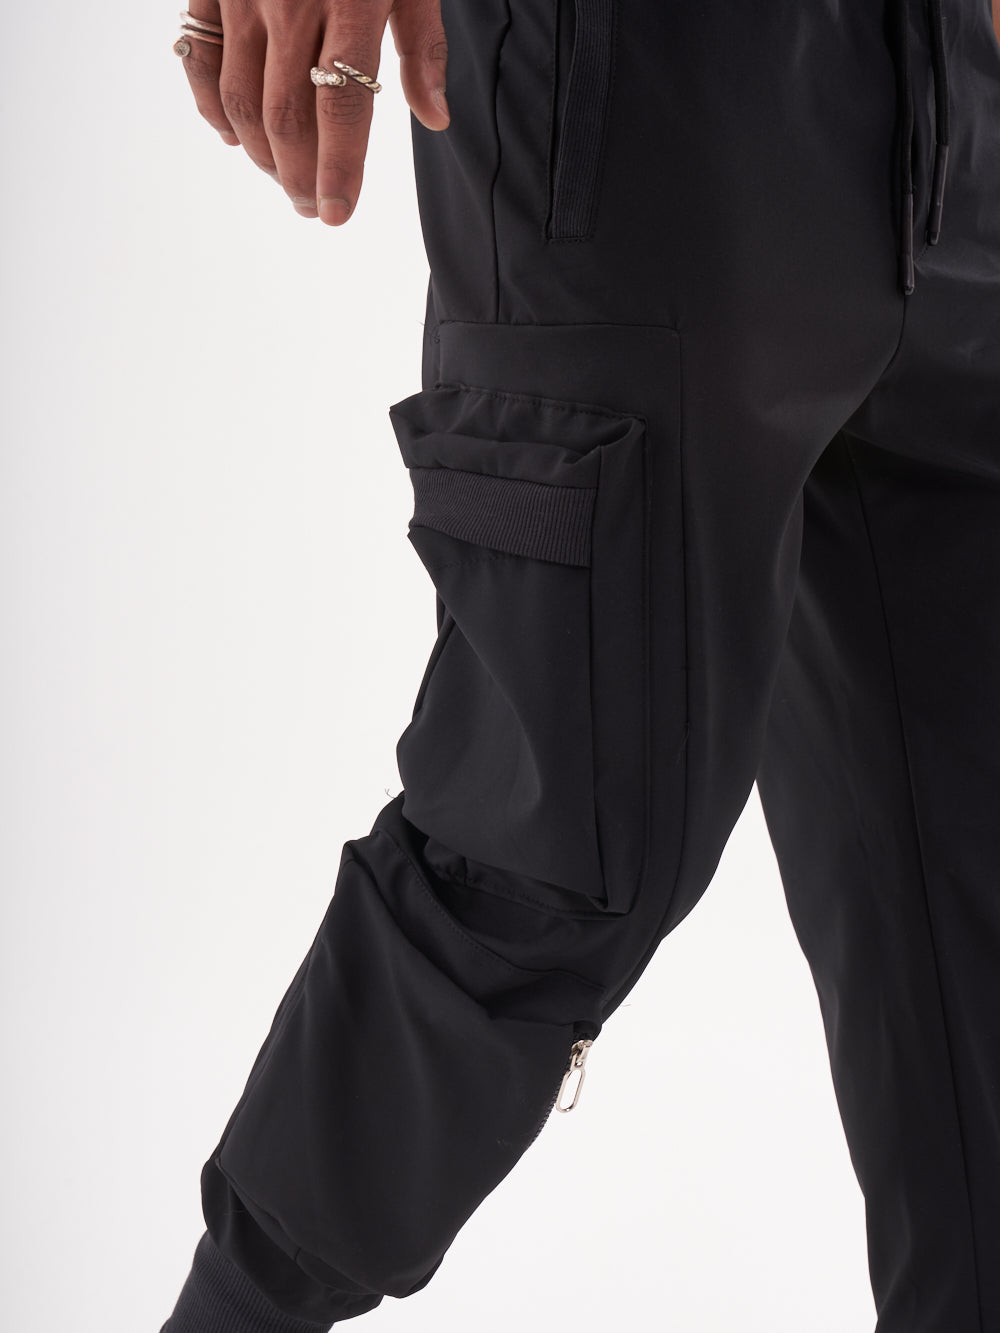 A man wearing OUTLIER JOGGERS | BLACK cargo pants with pockets.